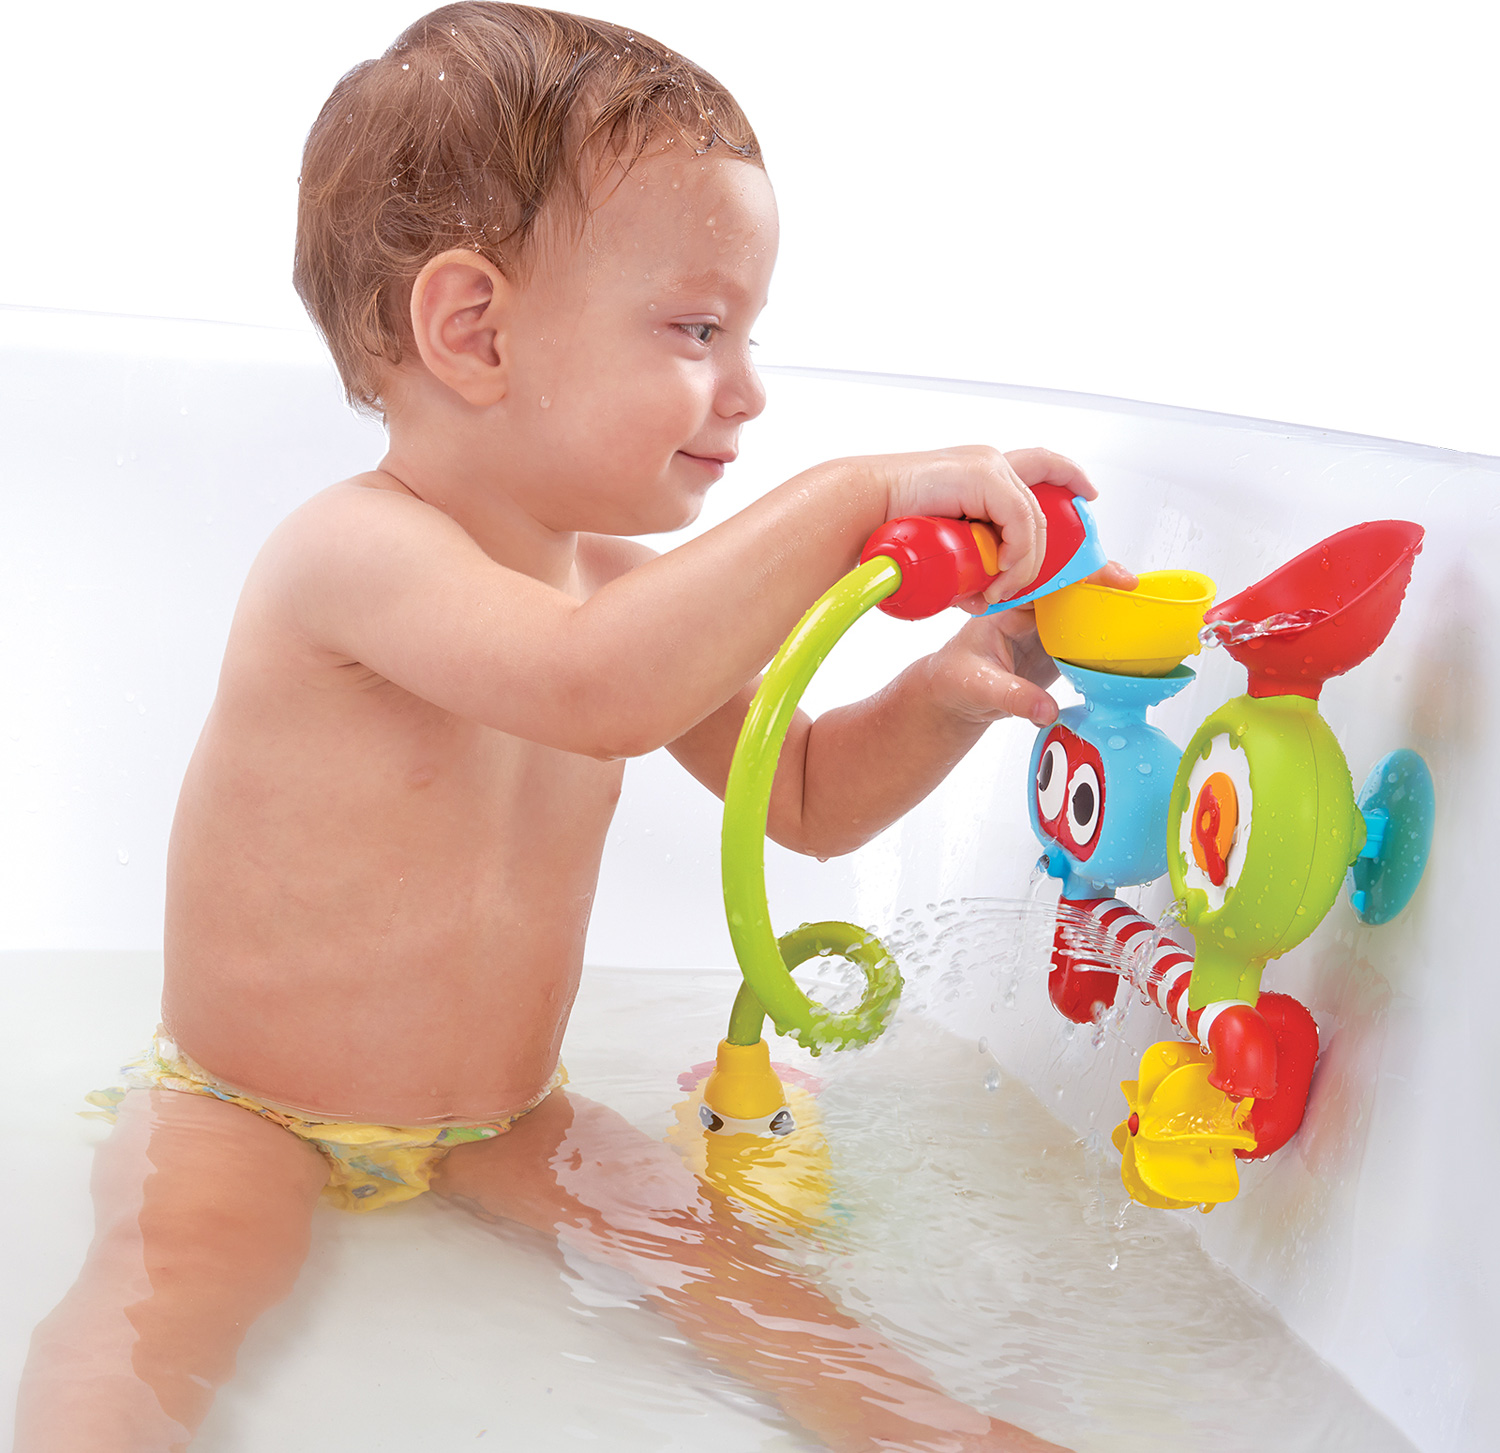 Yookidoo Kids Bath Toy Closed Box Battery Operated Water Pump with Hand Shower for Bathtime Play Generates Magical Effects Submarine Spray Station Age 2-6 Years 